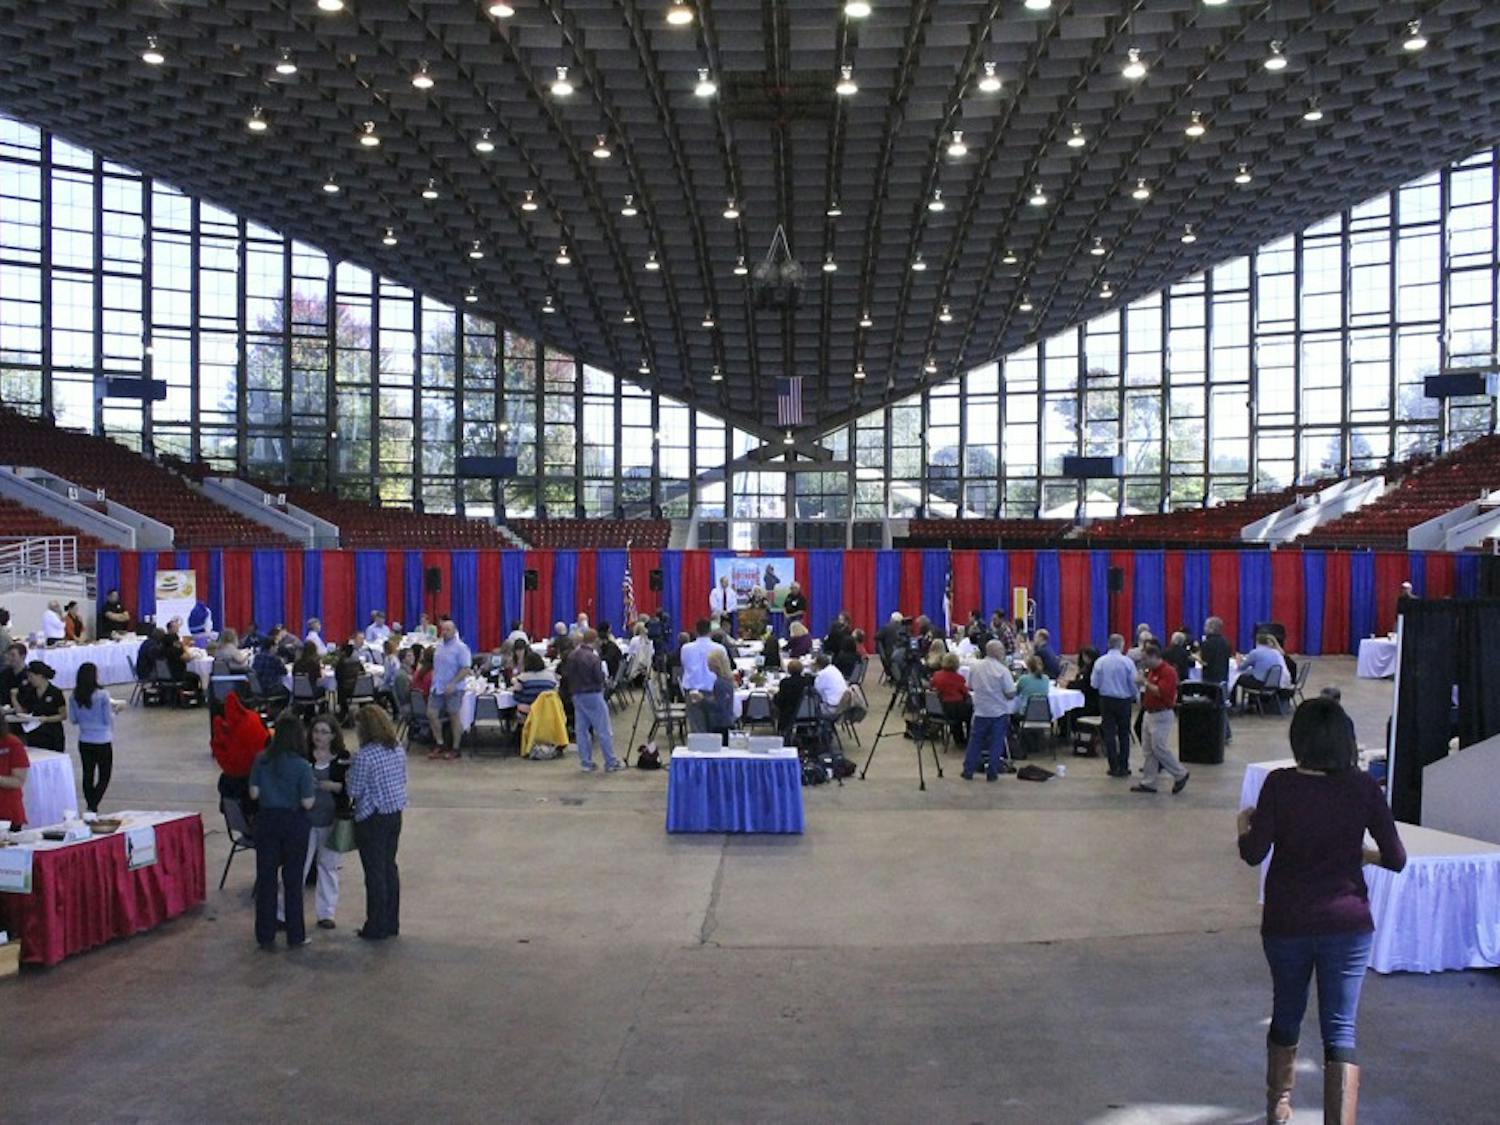 On Oct. 12, members of the media gathered in Dorton Arena in Raleigh to taste the different foods that will be available at the 2015 N.C. State Fair. Inside the arena, tasters could sample foods such as deep-fried pimento cheese, corn in a cup and deep-fried s’mores and Pop-Tarts. The fair will run from Oct. 15 to Oct. 25